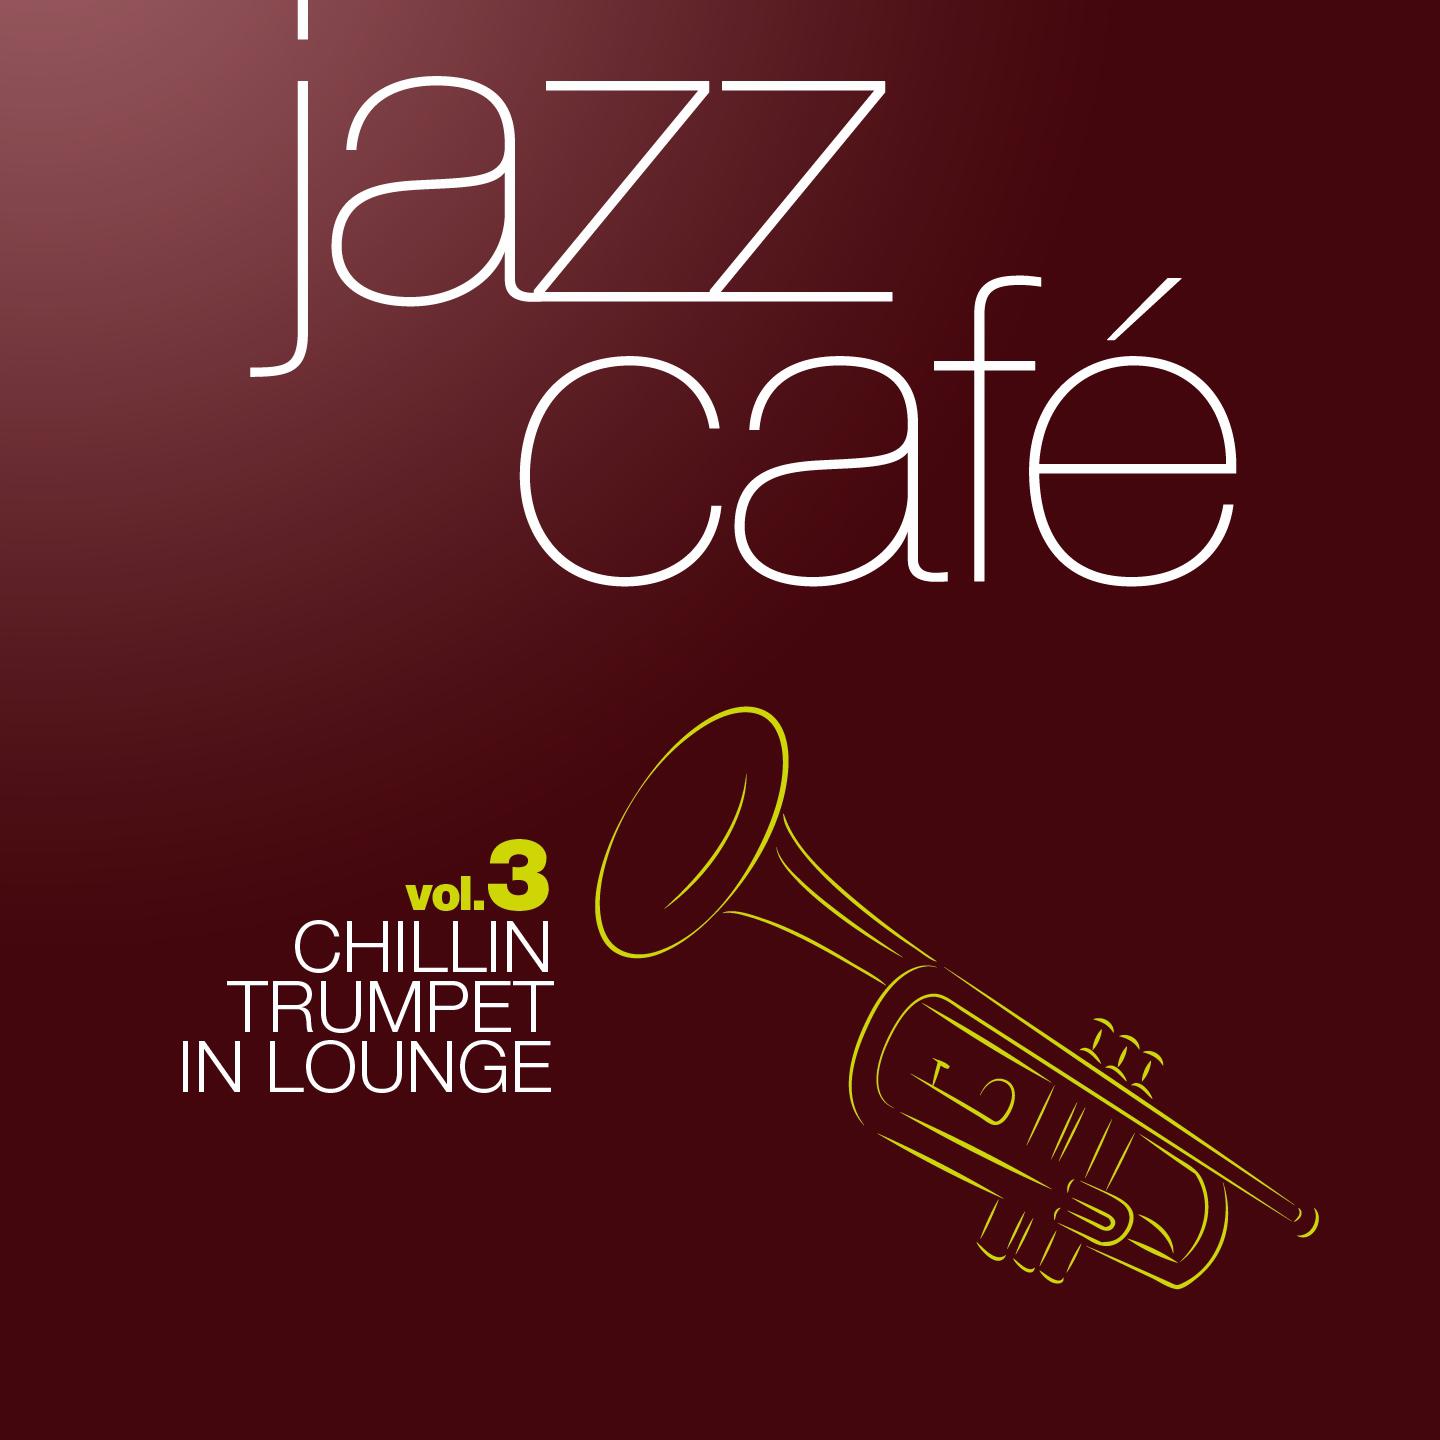 Jazz Cafe, Vol. 3 Chillin Trumpet Classics in Lounge